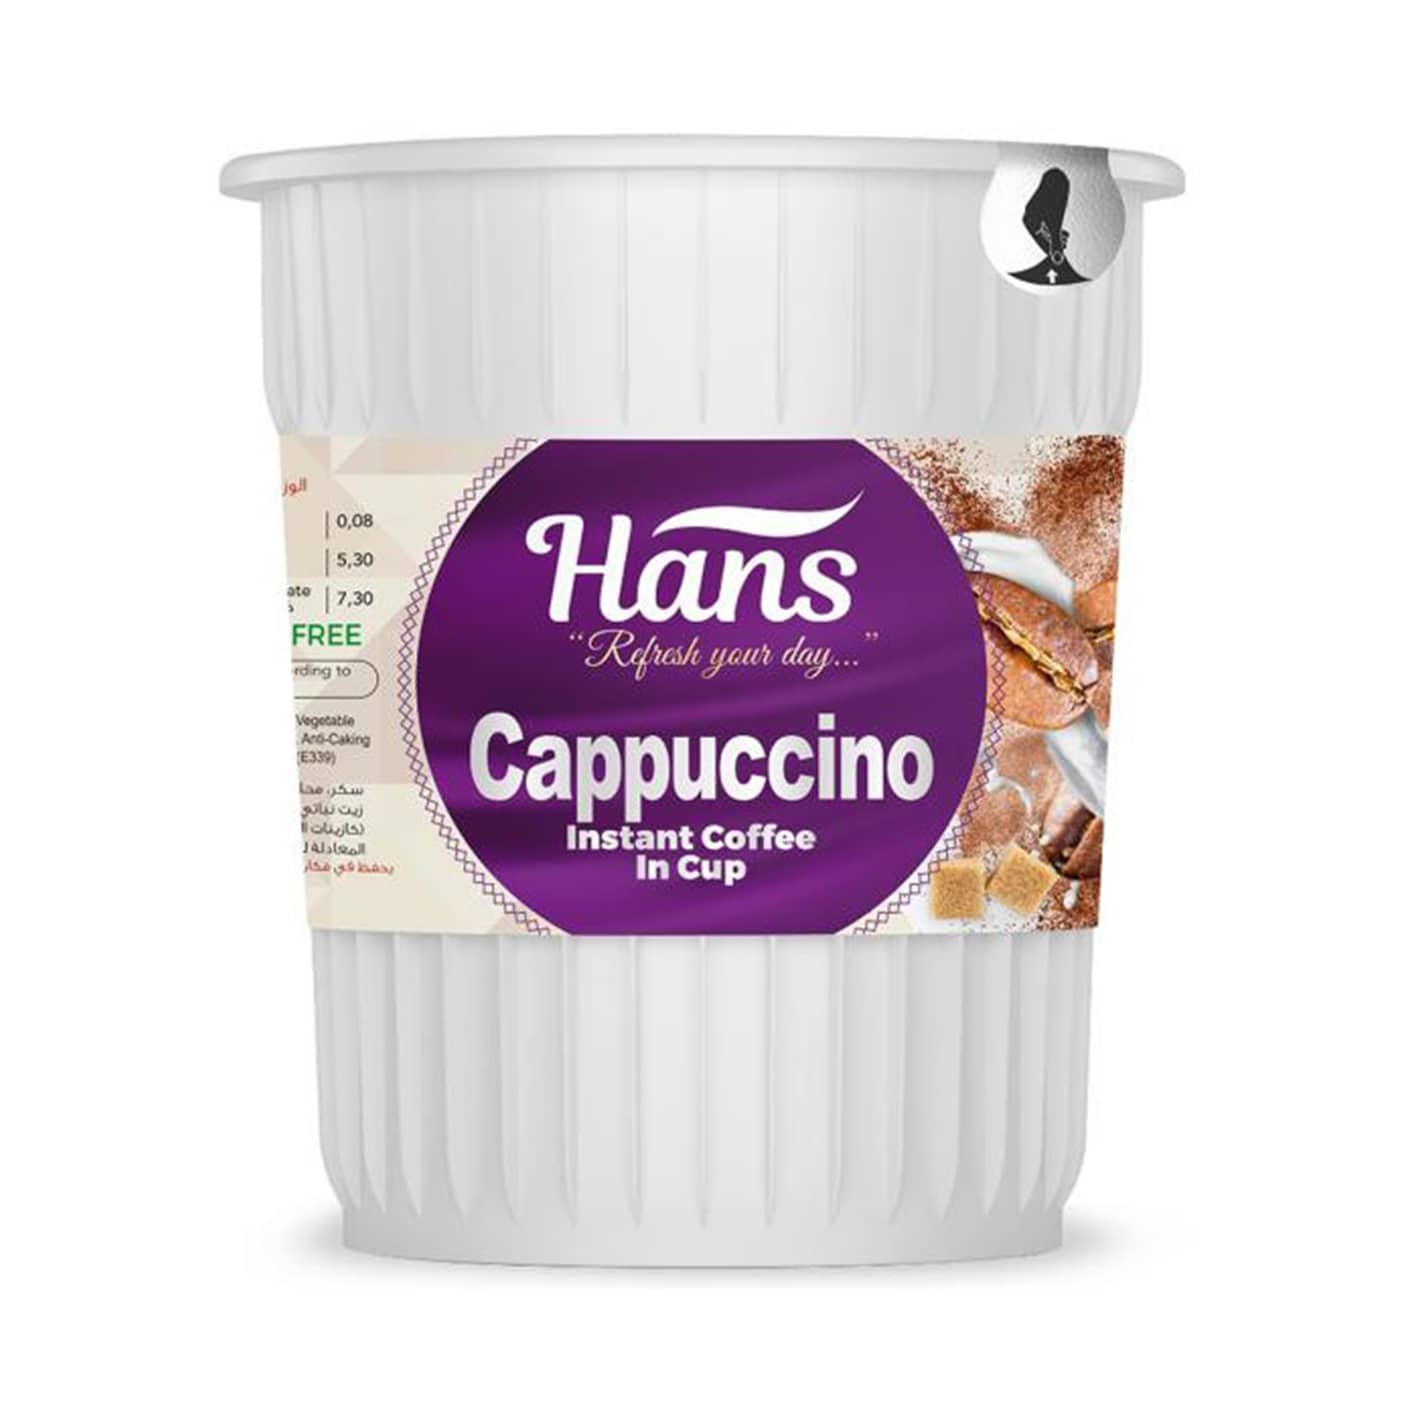 Hans Cappuccino Instant Coffee In Cup 6 Piece